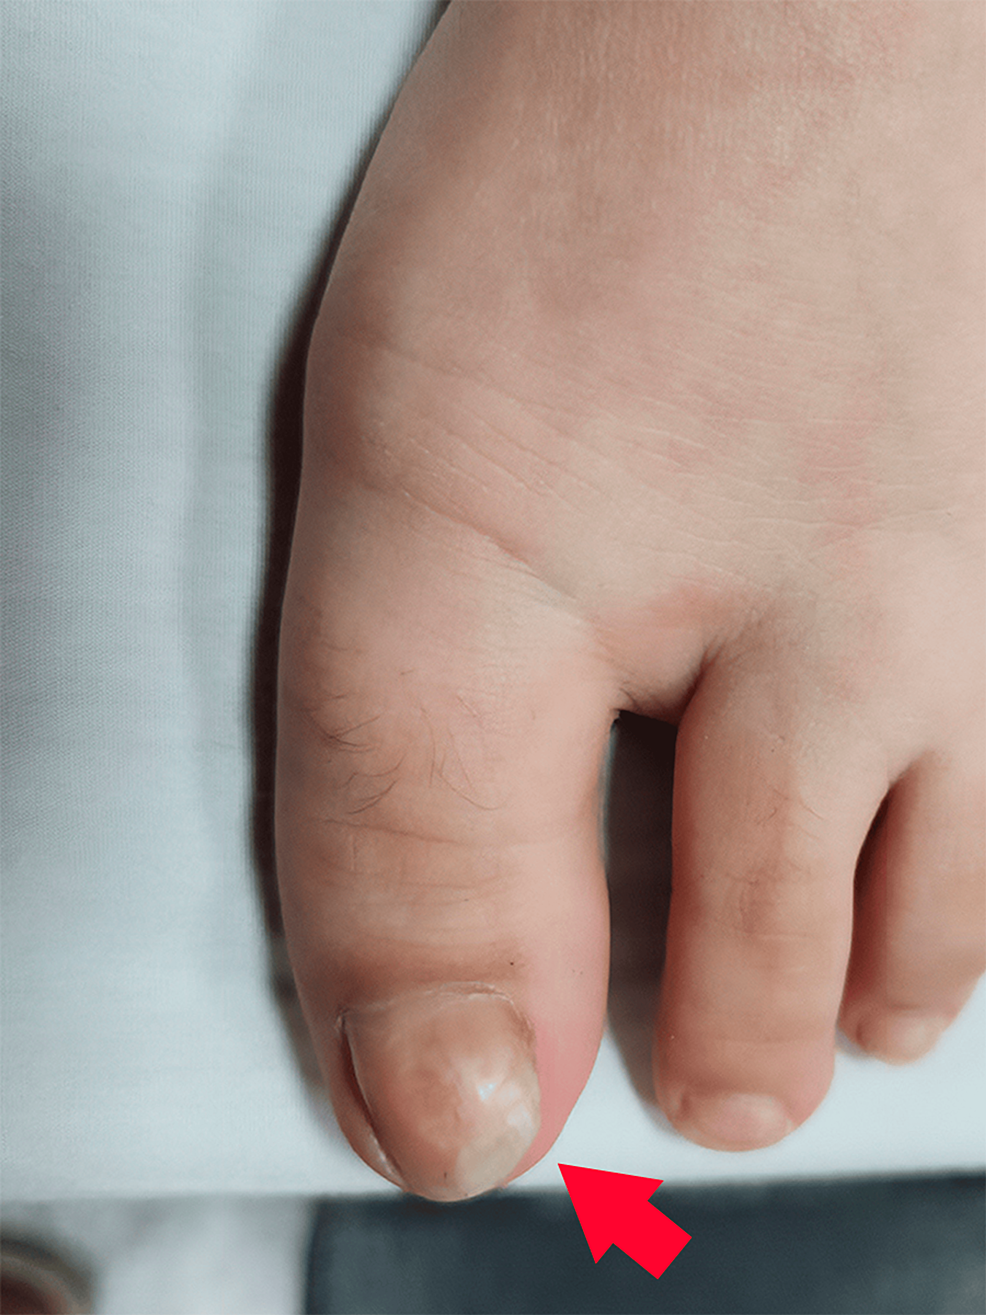 Pincer Toe nails: You've seen them; did you know what they were and how  they got that way? Or, did you dismiss them? — The Gait Guys